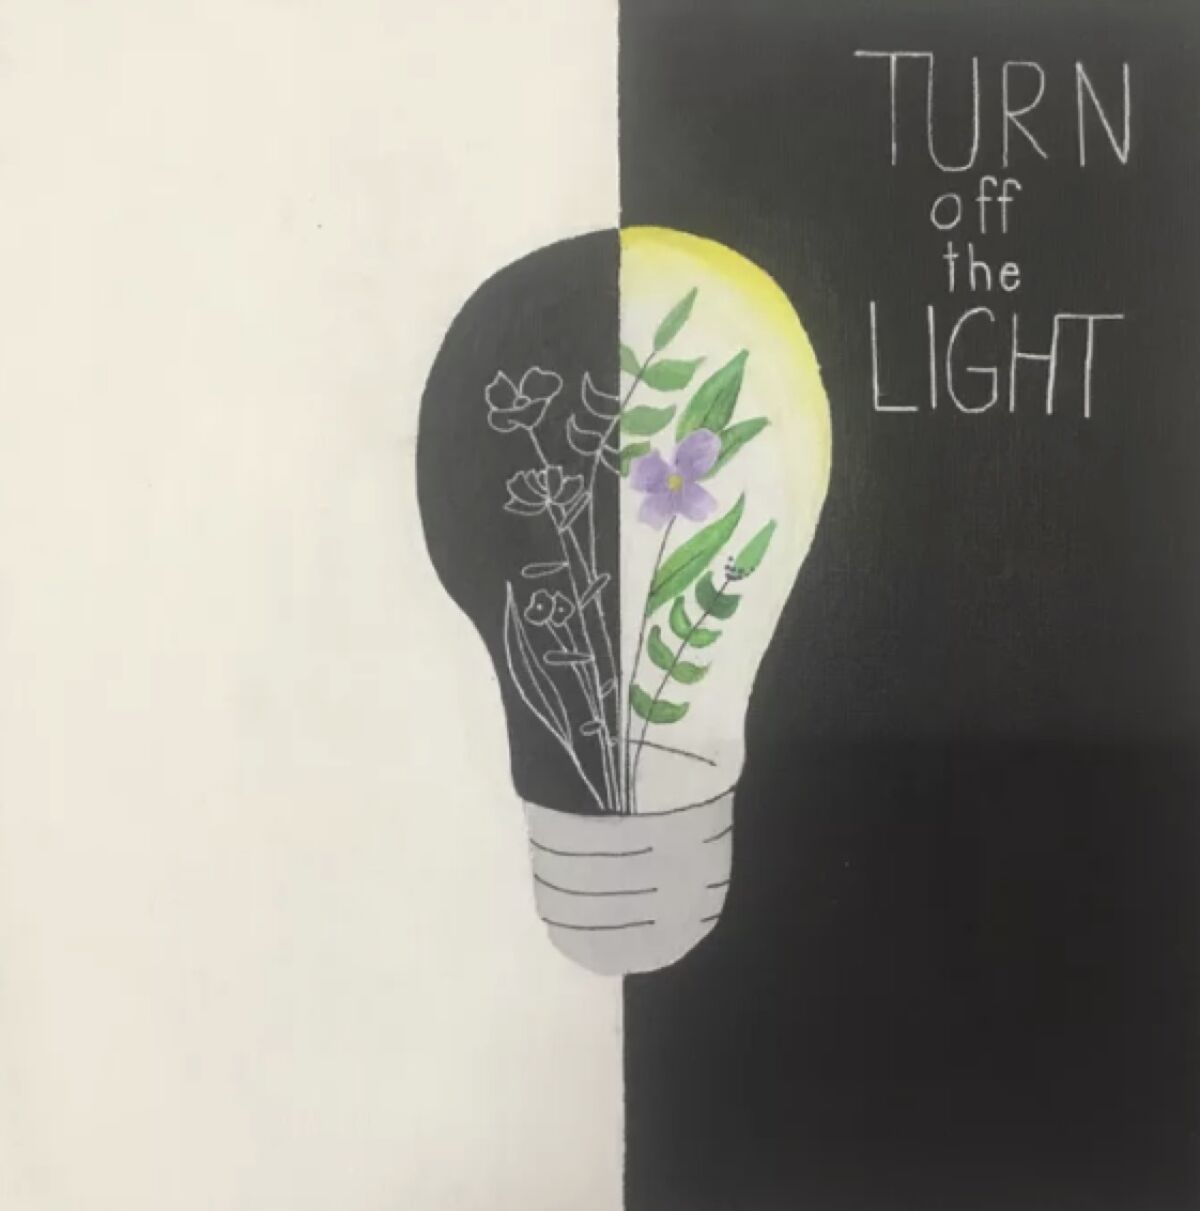 Solana Pacific sixth grade student Cici Mei created artwork, called “Turn Off the Light”.